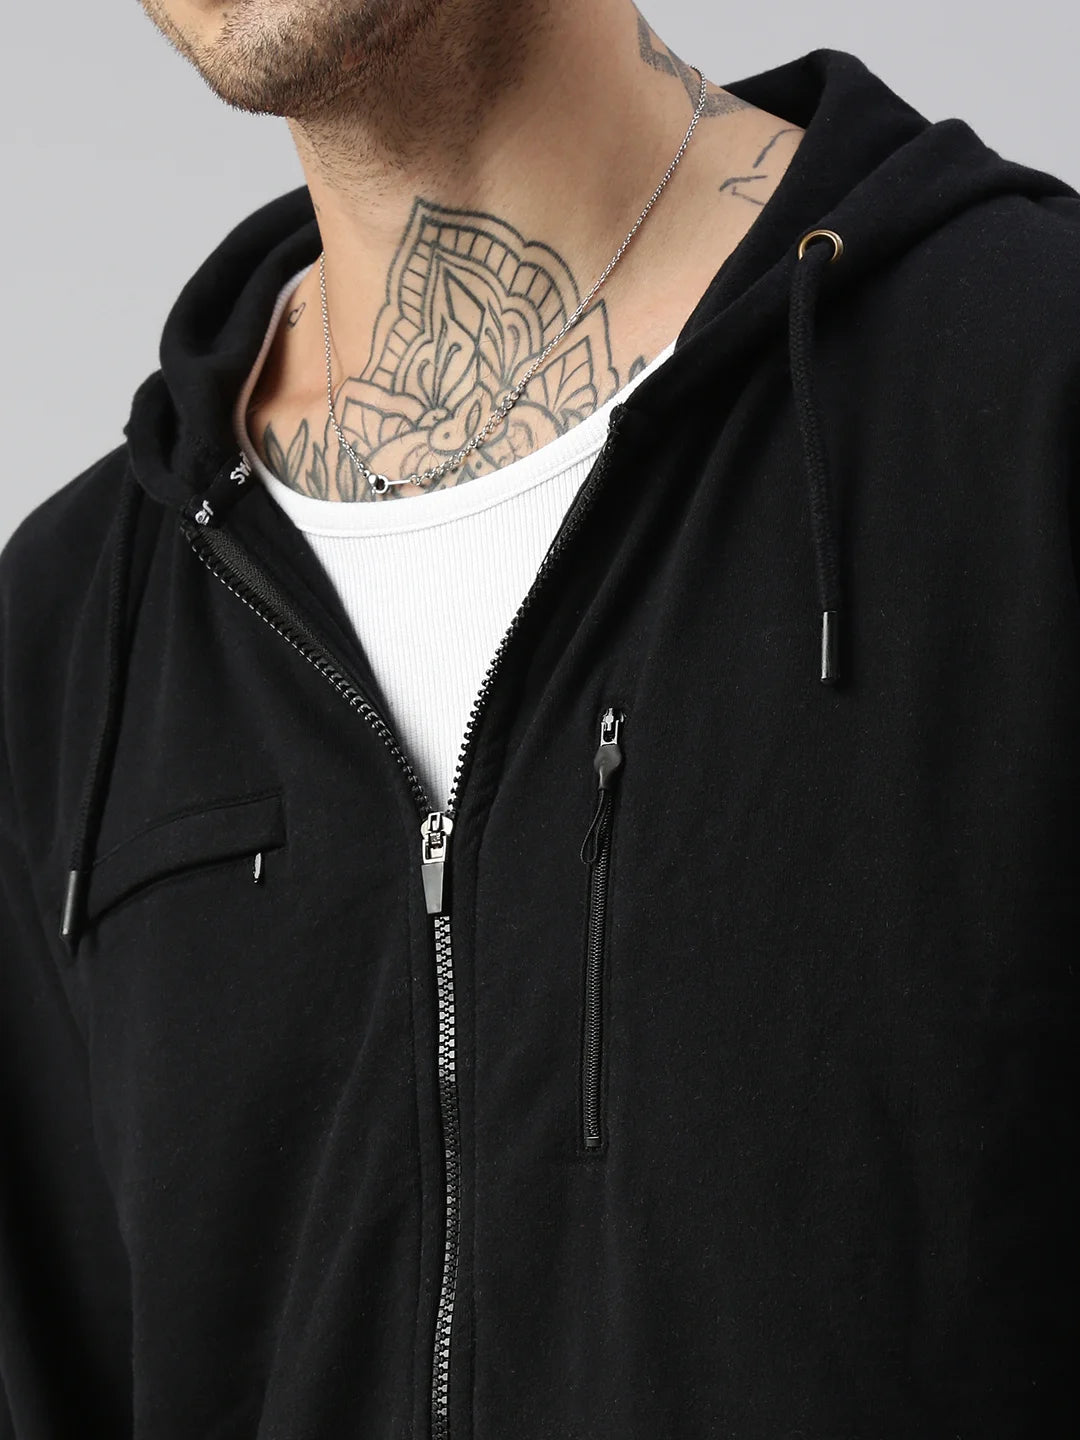 mens-moleson-recycled-cotton-poliestere-zip-hoodie-noir-front